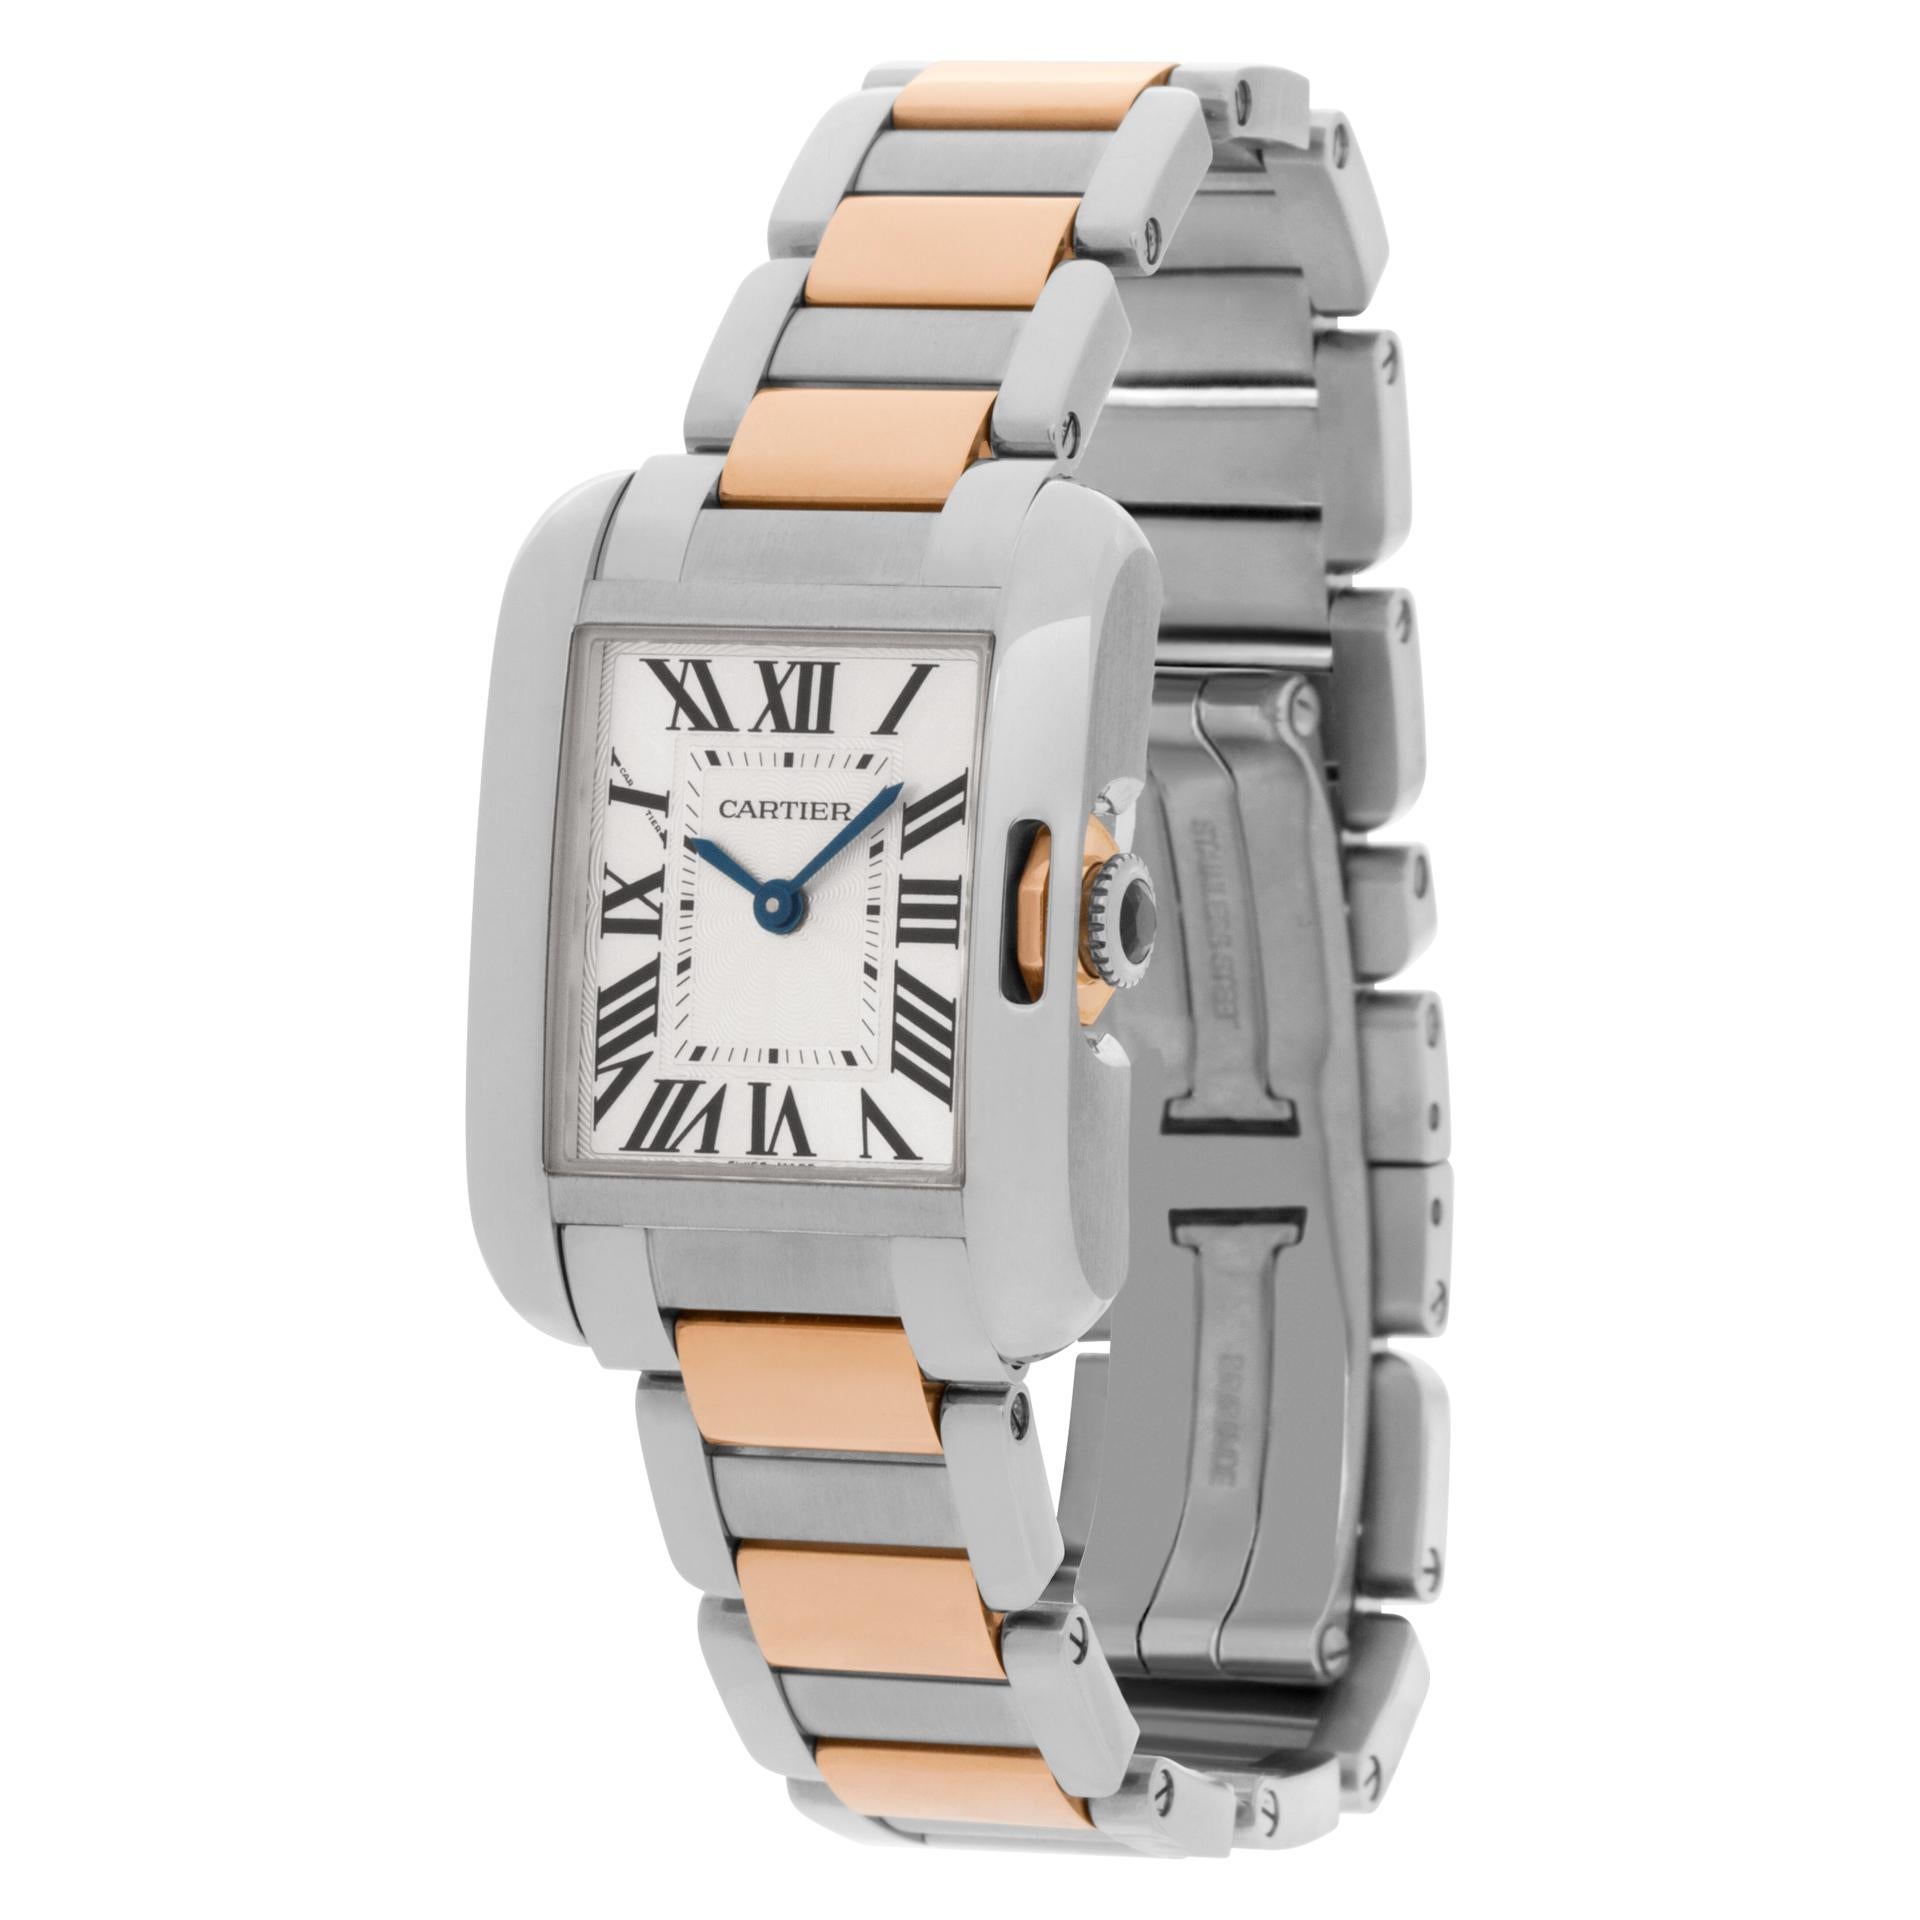 Cartier Tank Anglaise small size in 18k rose gold & stainless steel. Quartz. 23 mm width by 30 mm length case size. Ref w5310036. Fine Pre-owned Cartier Watch.

Certified preowned Classic Cartier Tank Anglaise w5310036 watch is made out of Stainless